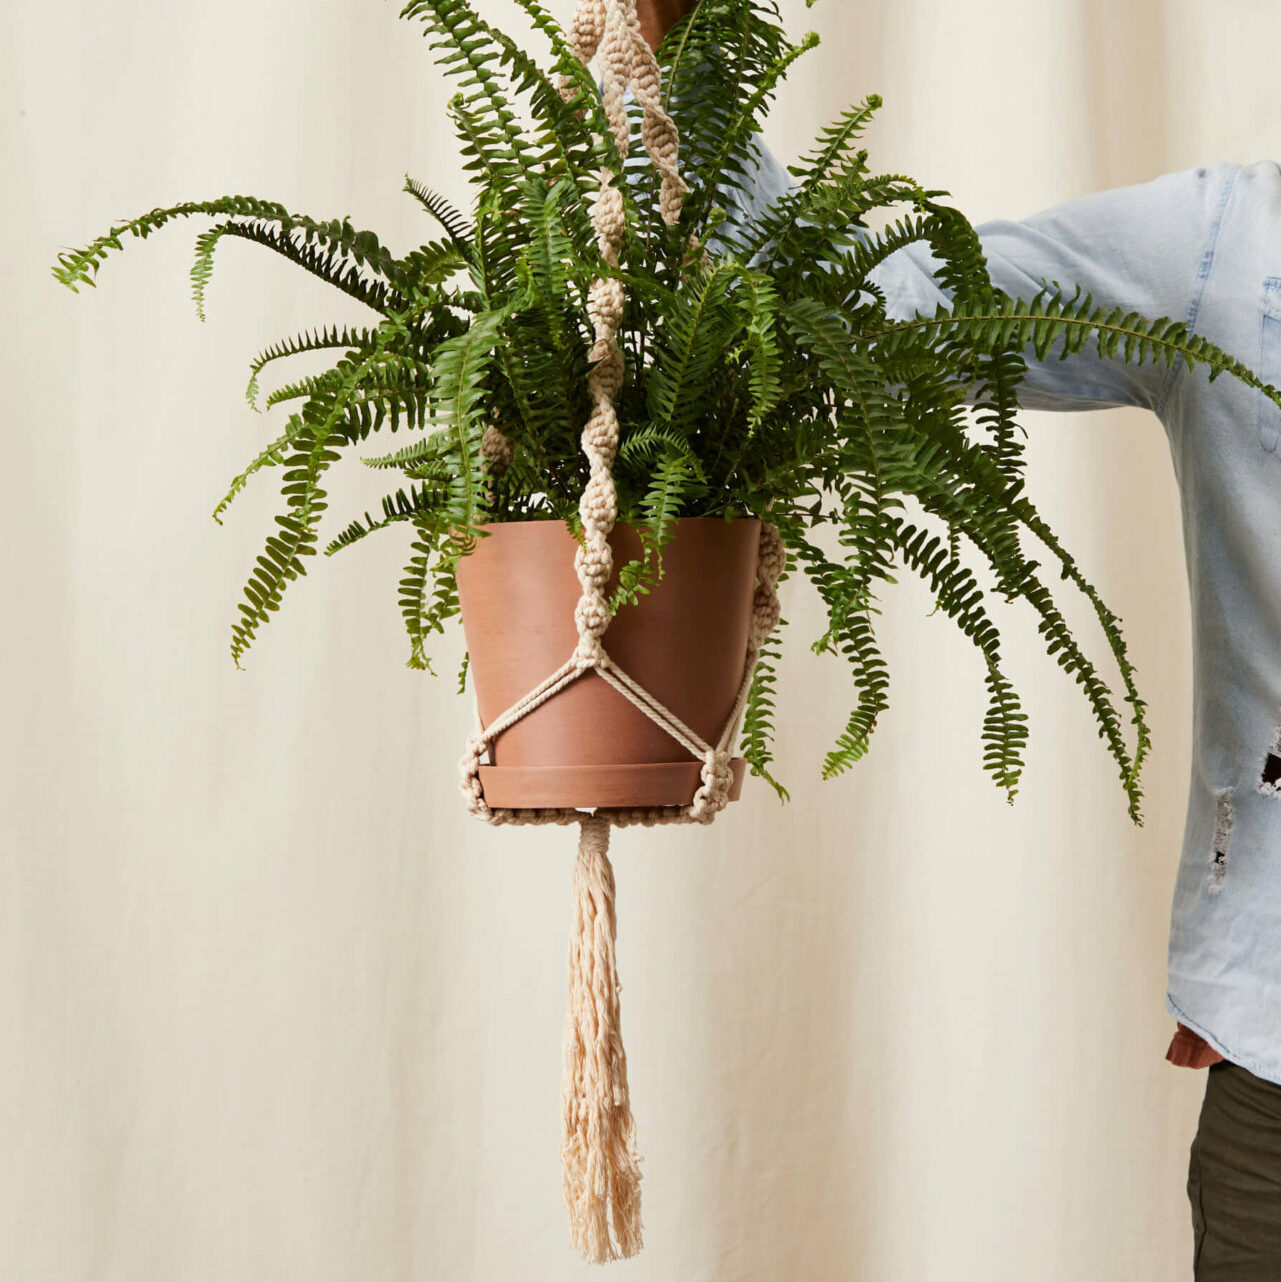 A man out of frame holding a terracotta potted plant in a macrame hanger